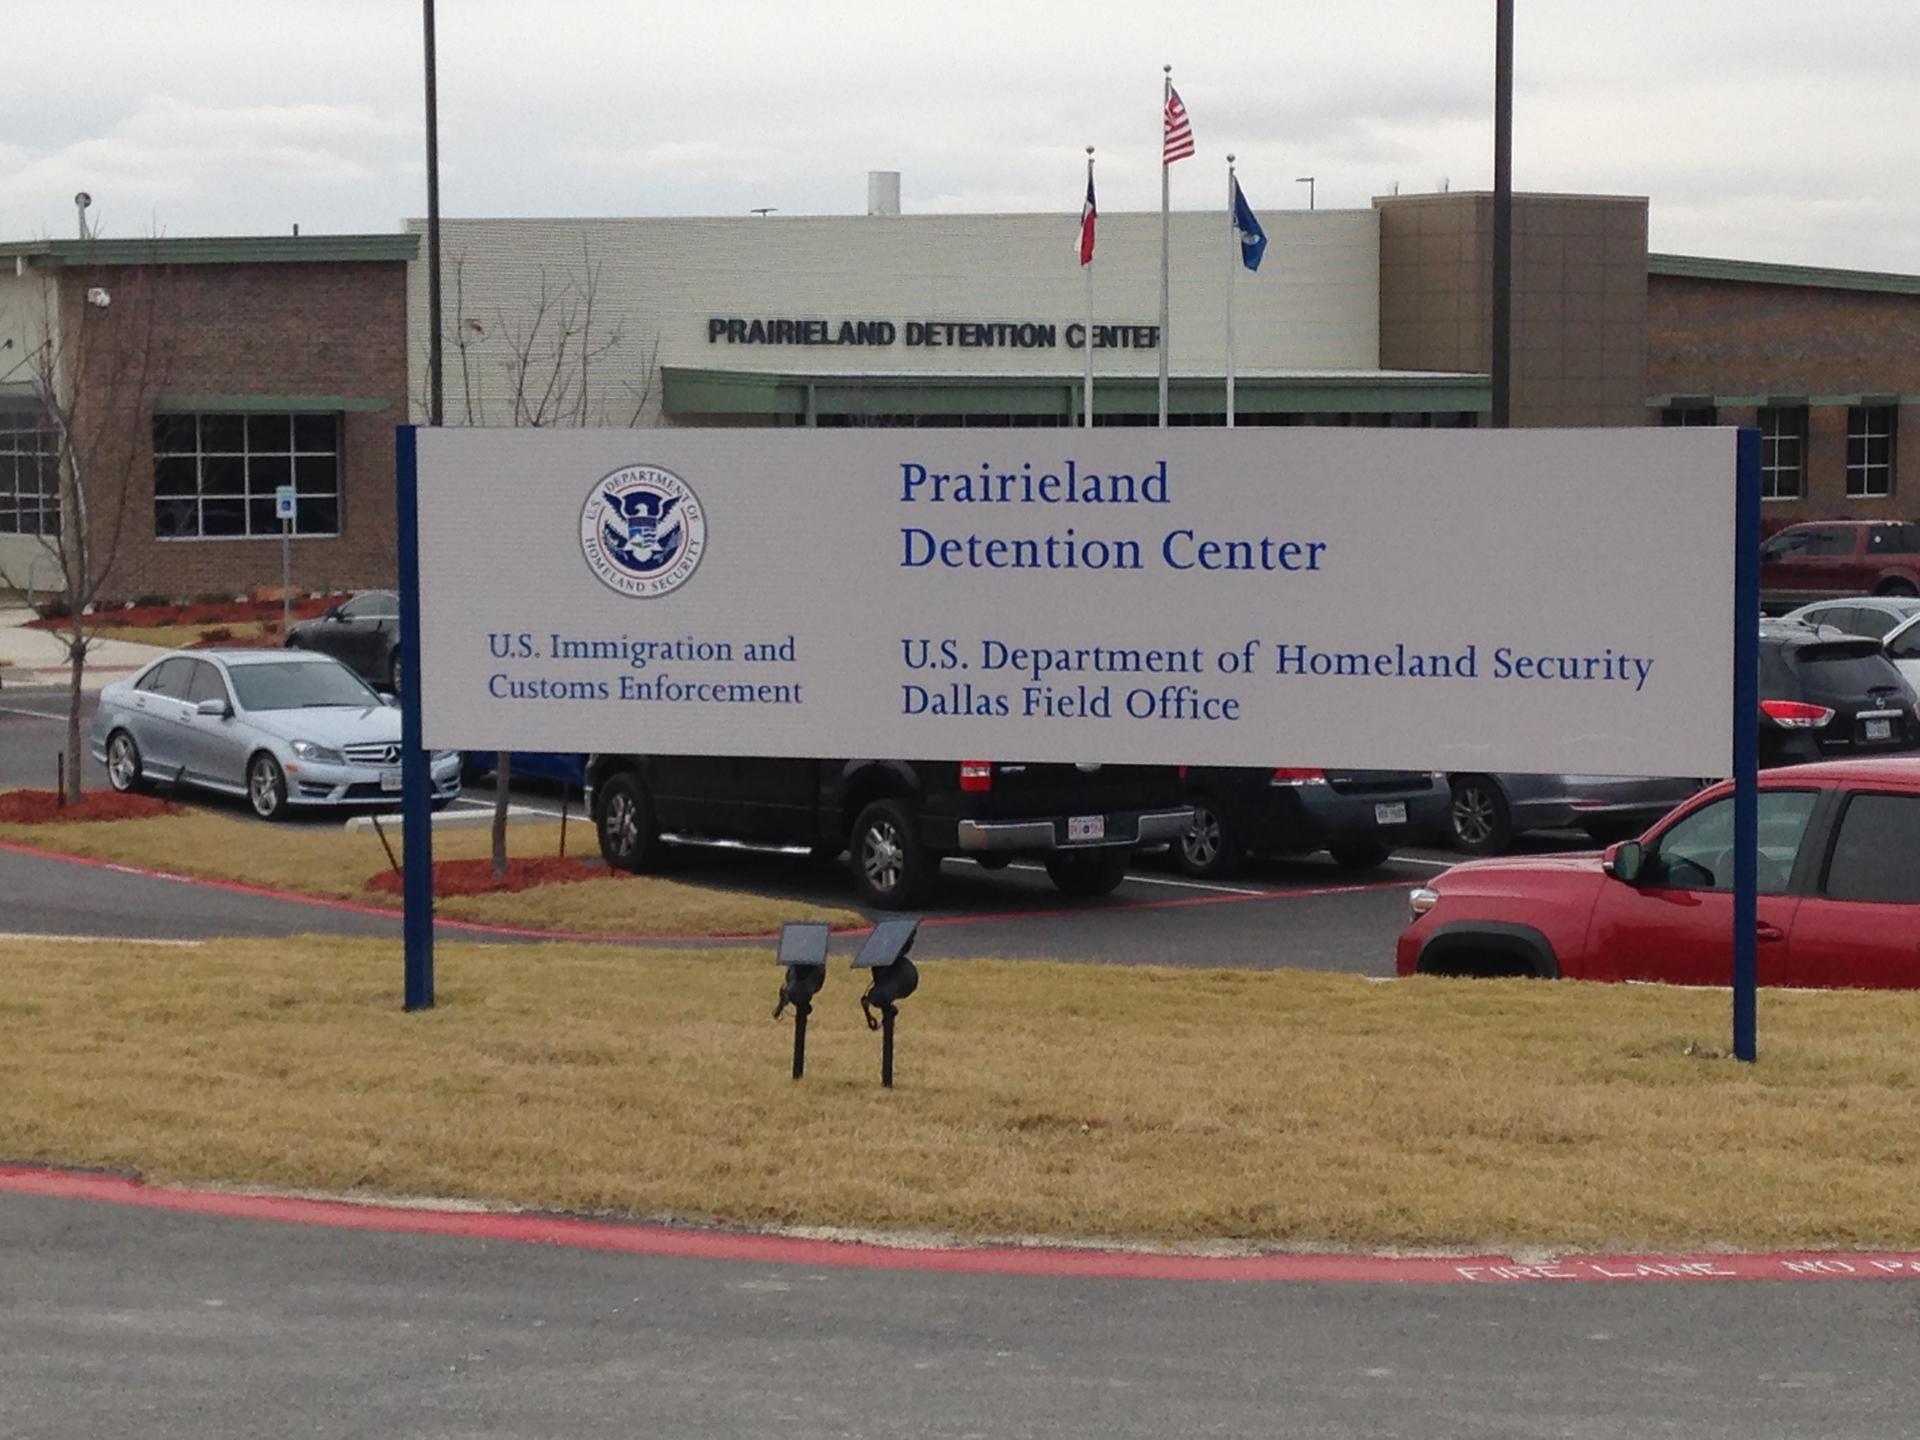 Front of building with sign for Prairieland Detention Center